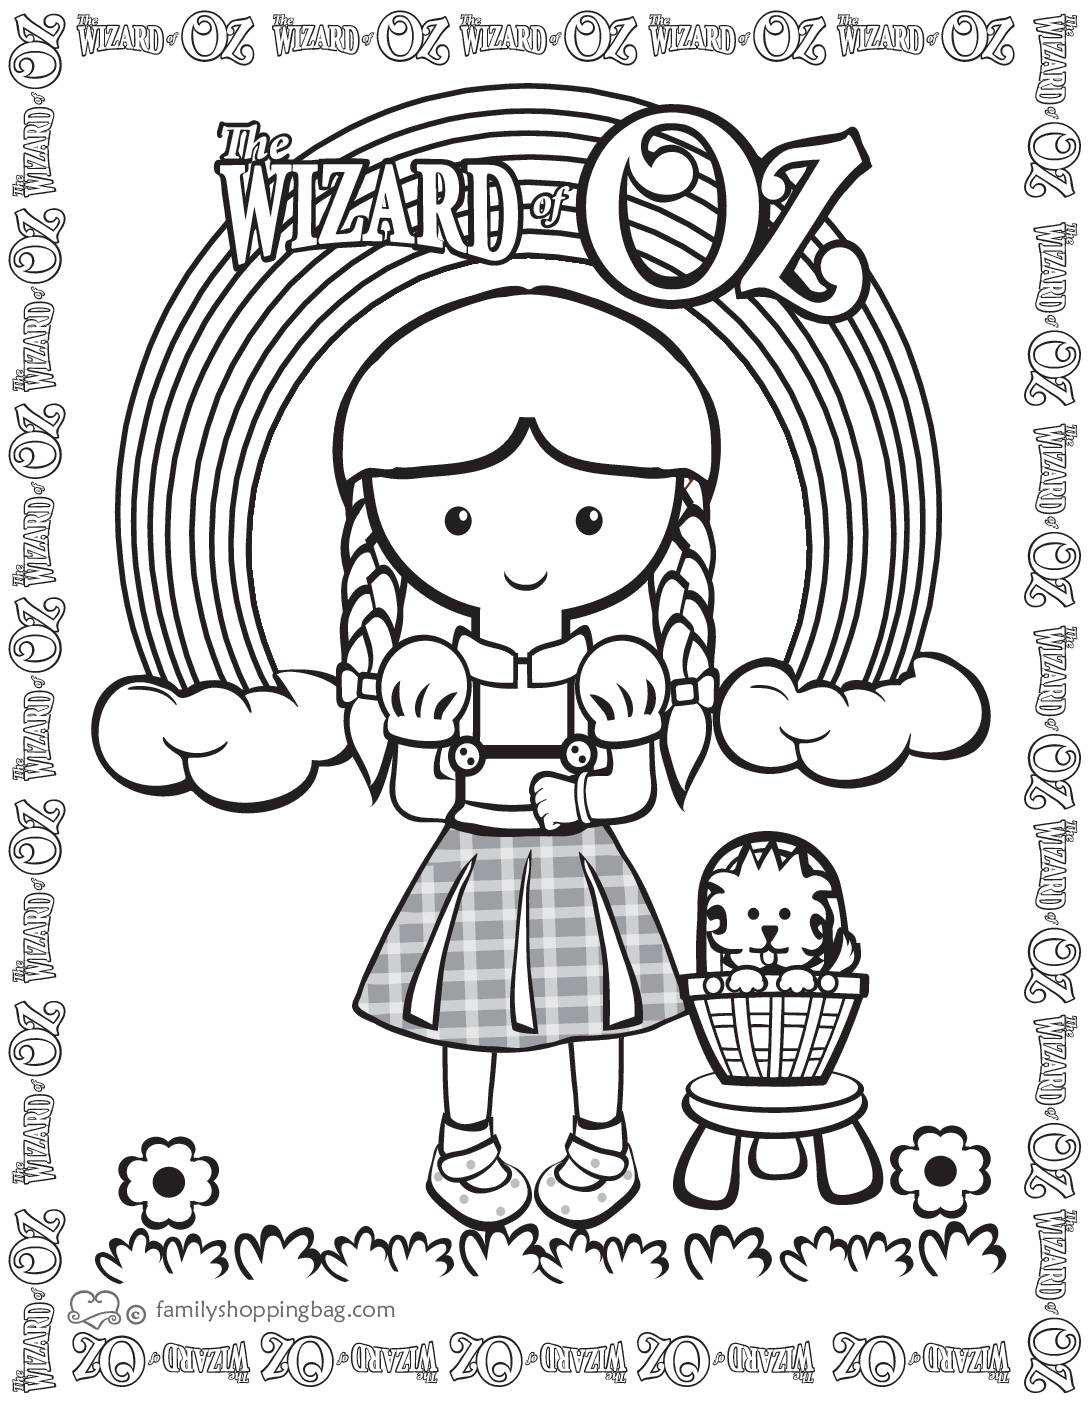 Coloring Page 4 Wizard of Oz